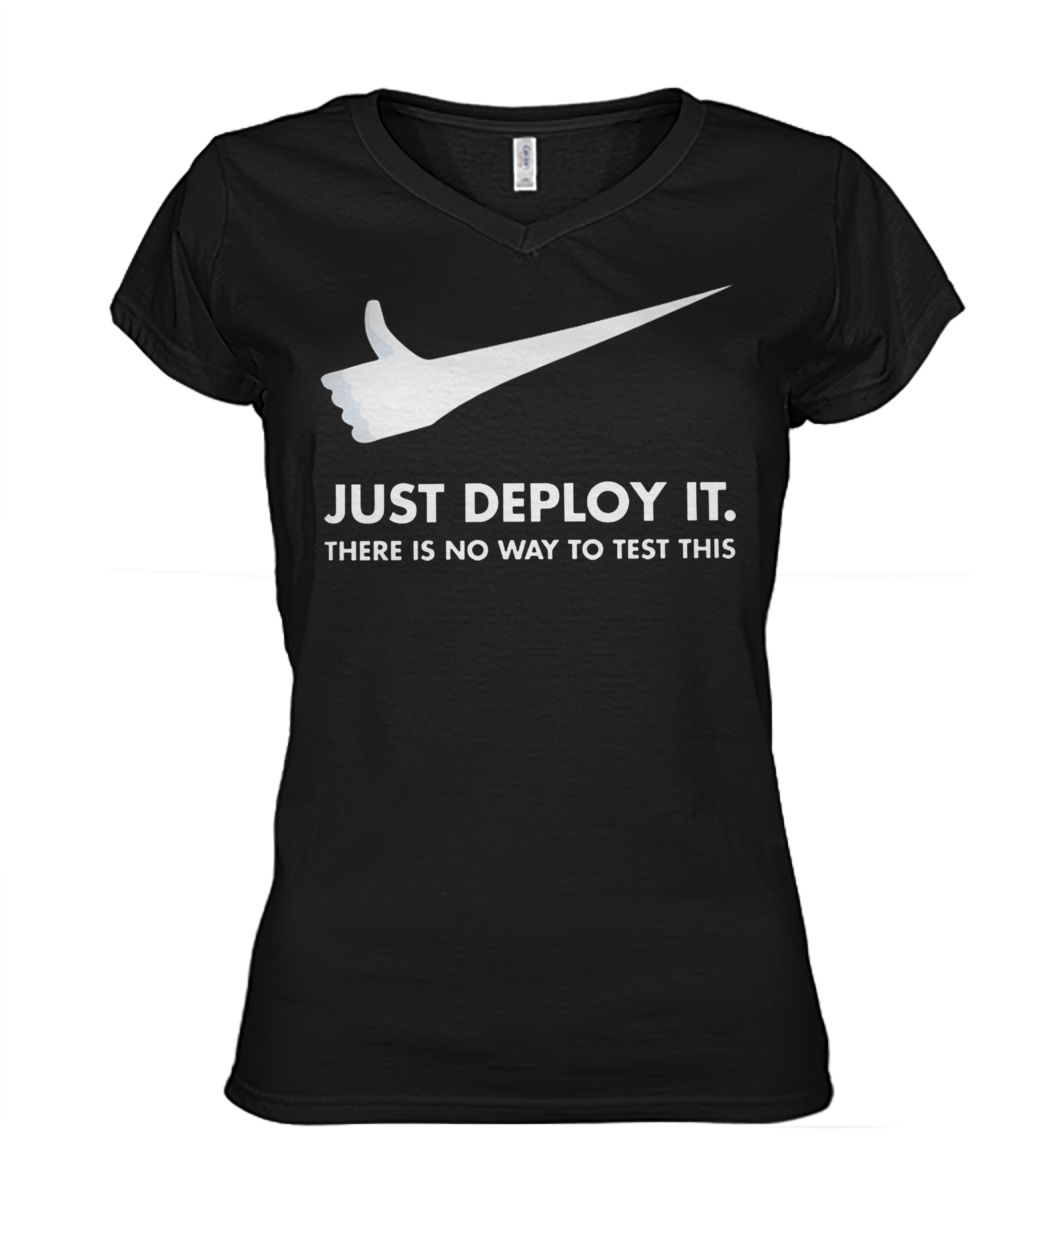 Just deploy it there is no way to test this women's v-neck